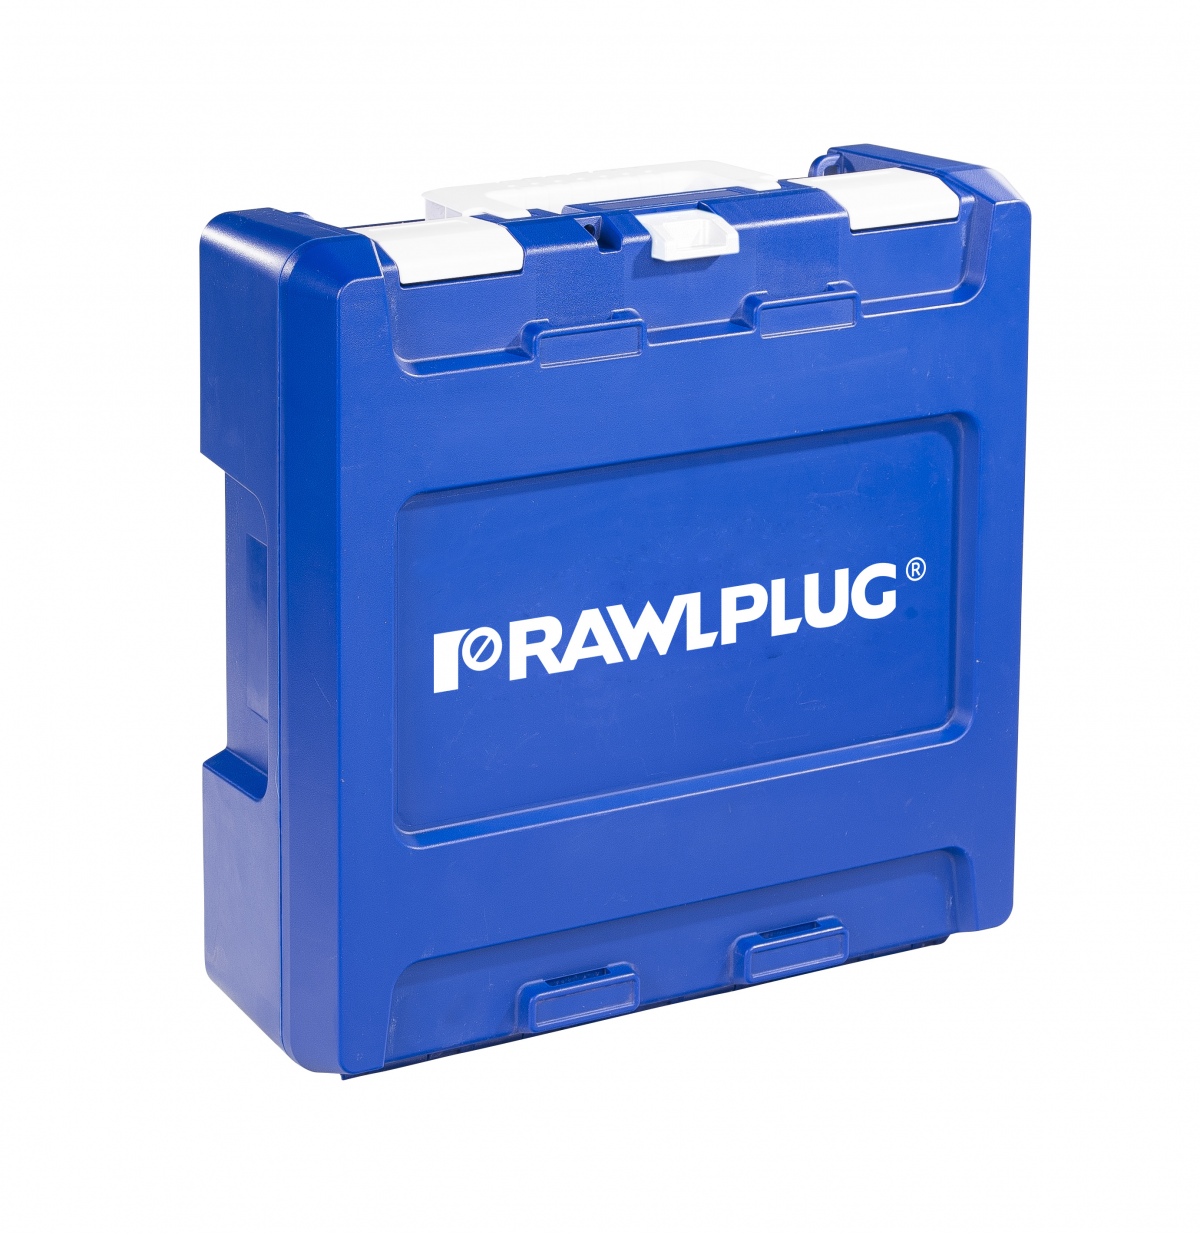 R-PDS18-S Cordless drywall RawlDriver 18V bare tool, in a transport case